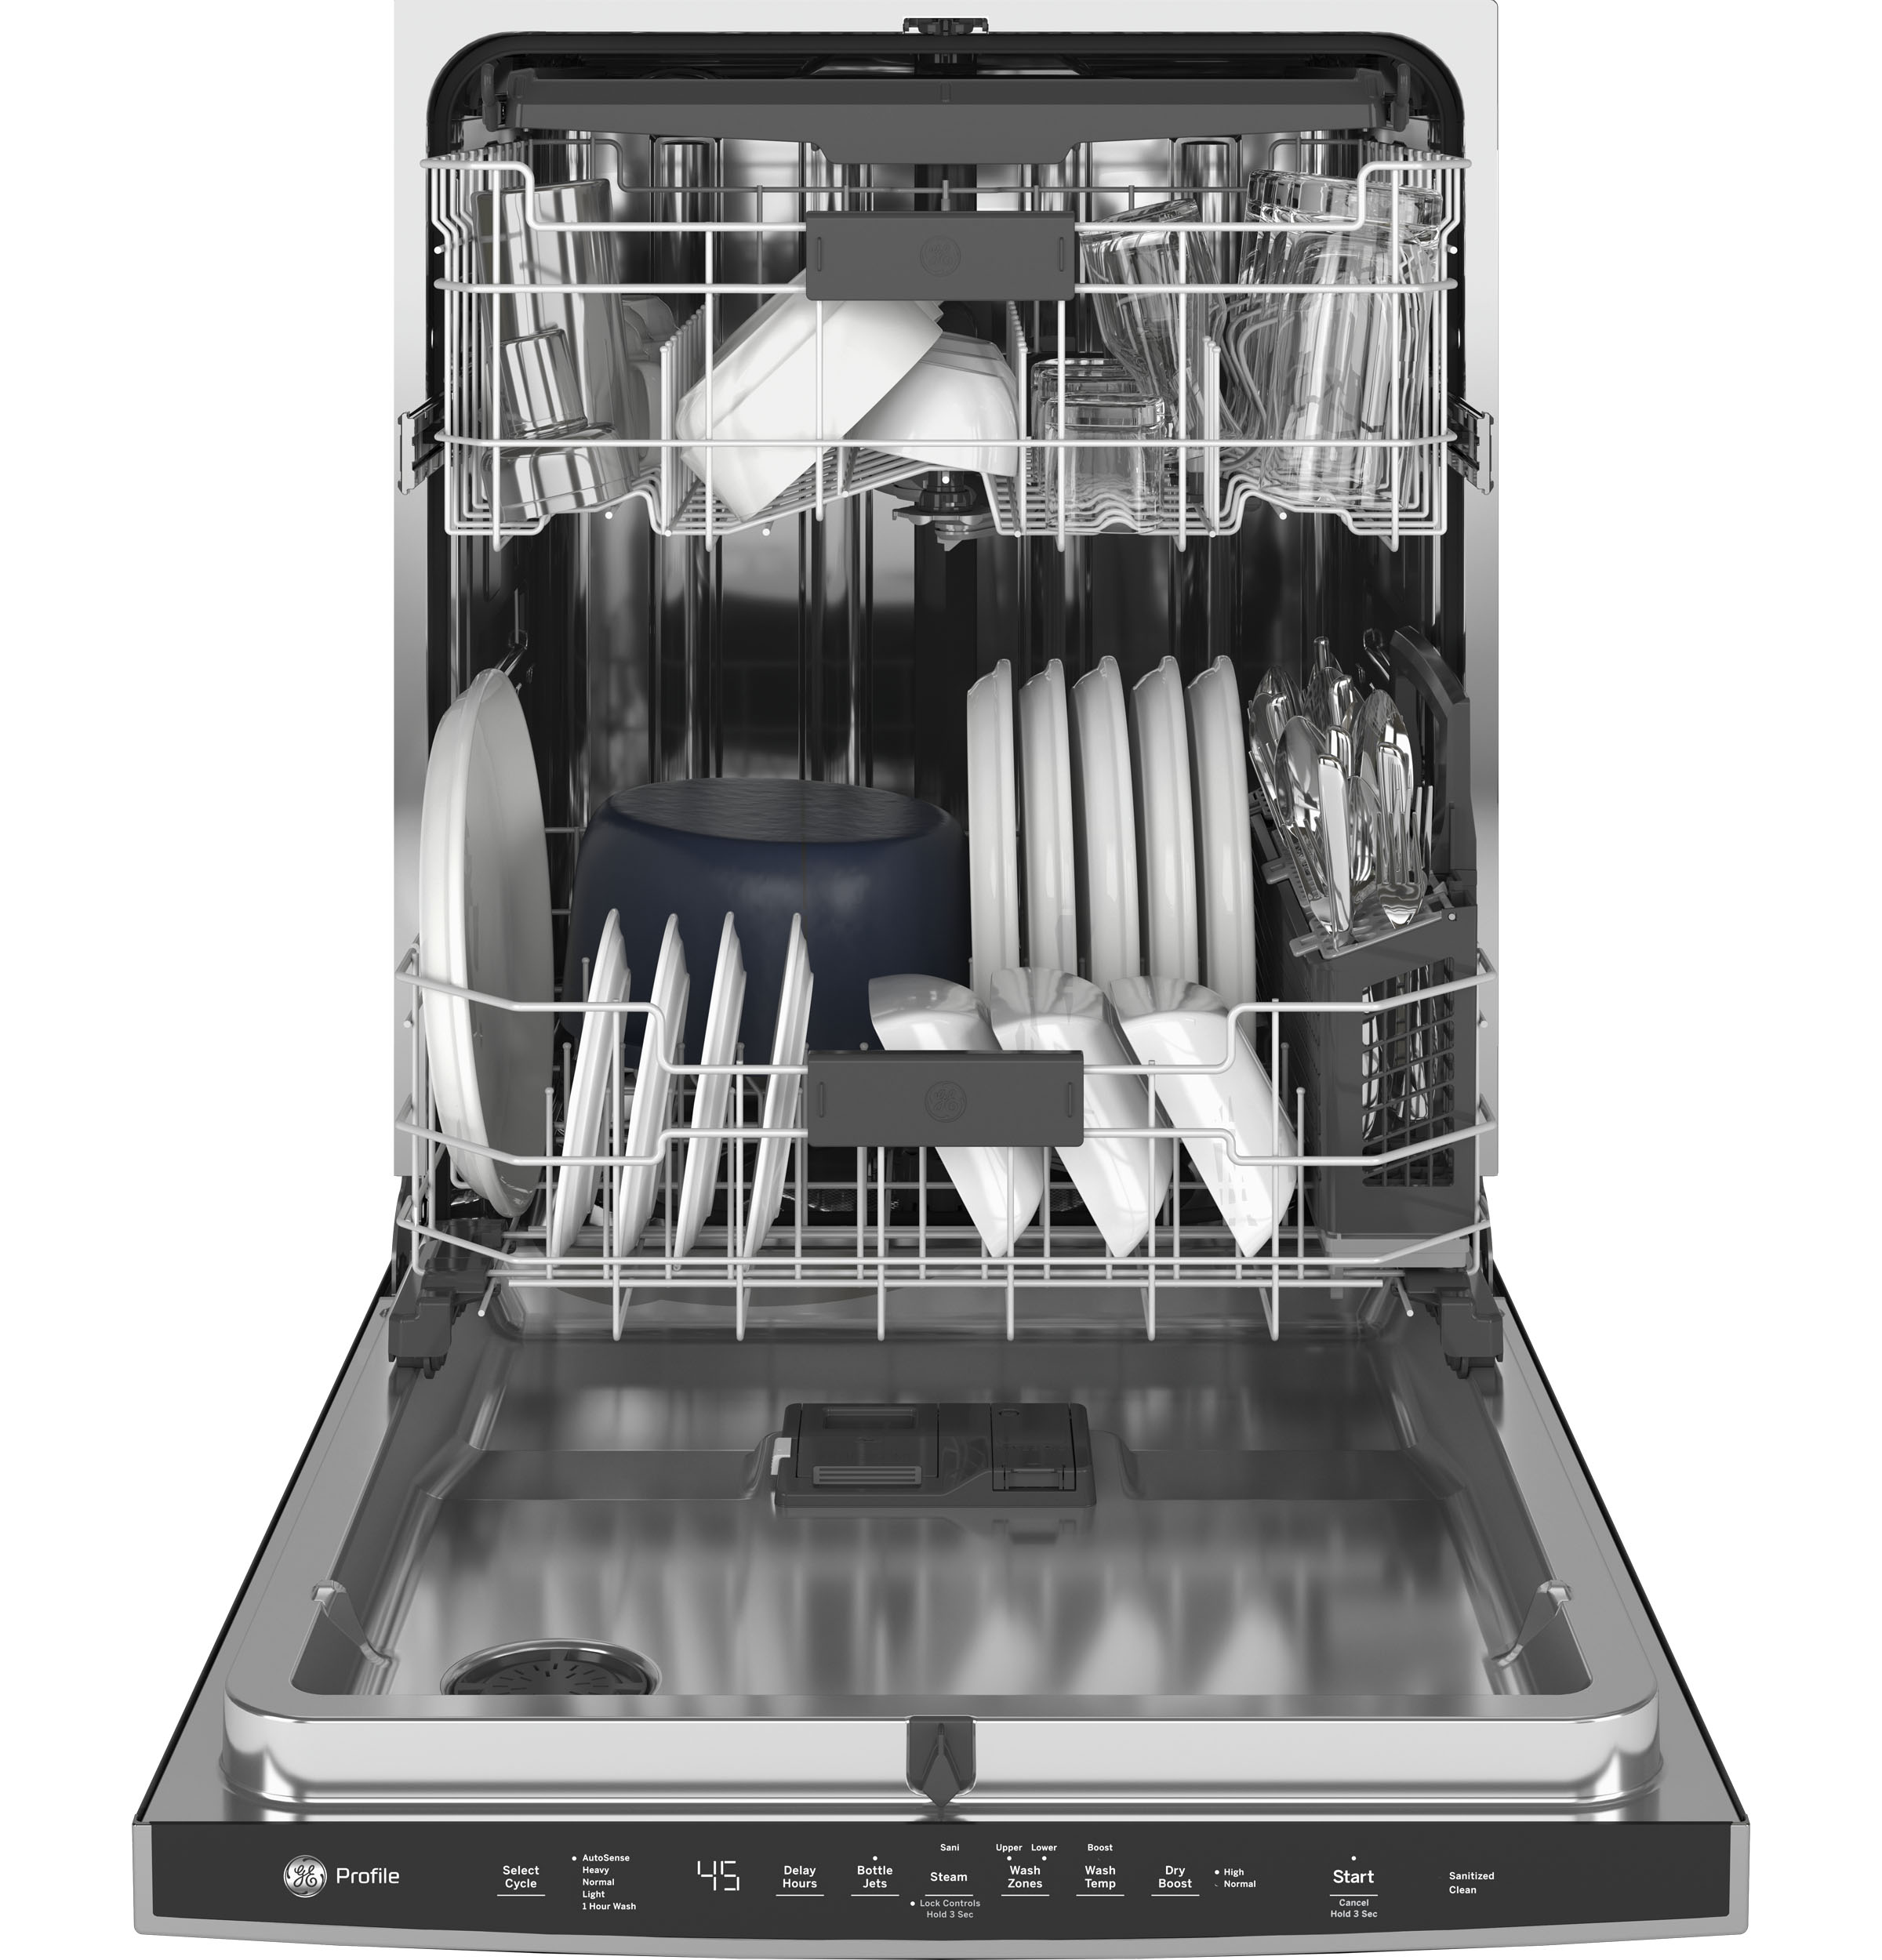 Model: PDP715SYNFS | GE Profile GE Profile™ ENERGY STAR® Fingerprint Resistant Top Control with Stainless Steel Interior Dishwasher with Sanitize Cycle & Dry Boost with Fan Assist